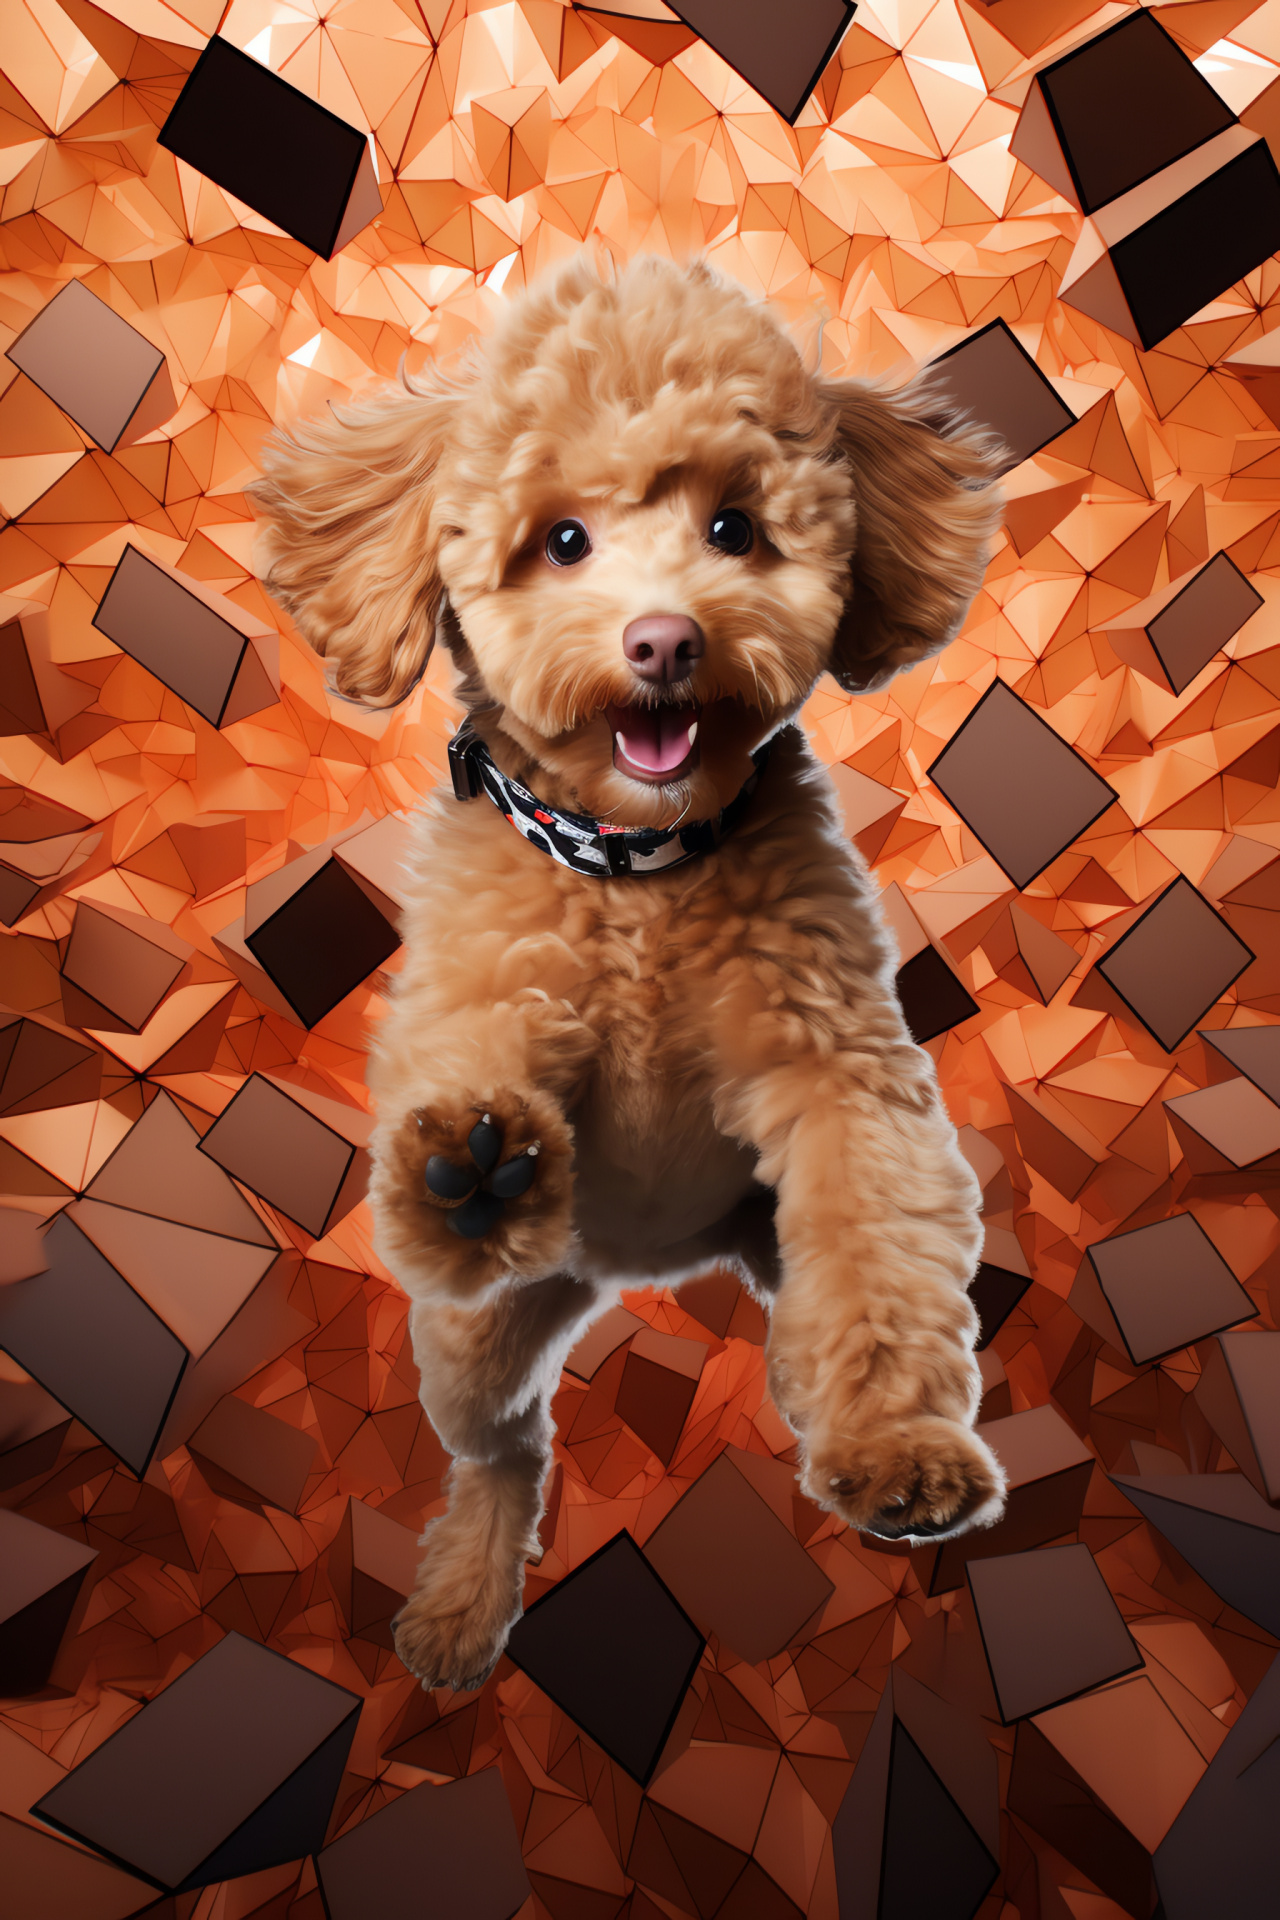 Apricot Poodle, playful canine, teddy bear grooming, vibrant geometric patterns, artistic scene, HD Phone Wallpaper